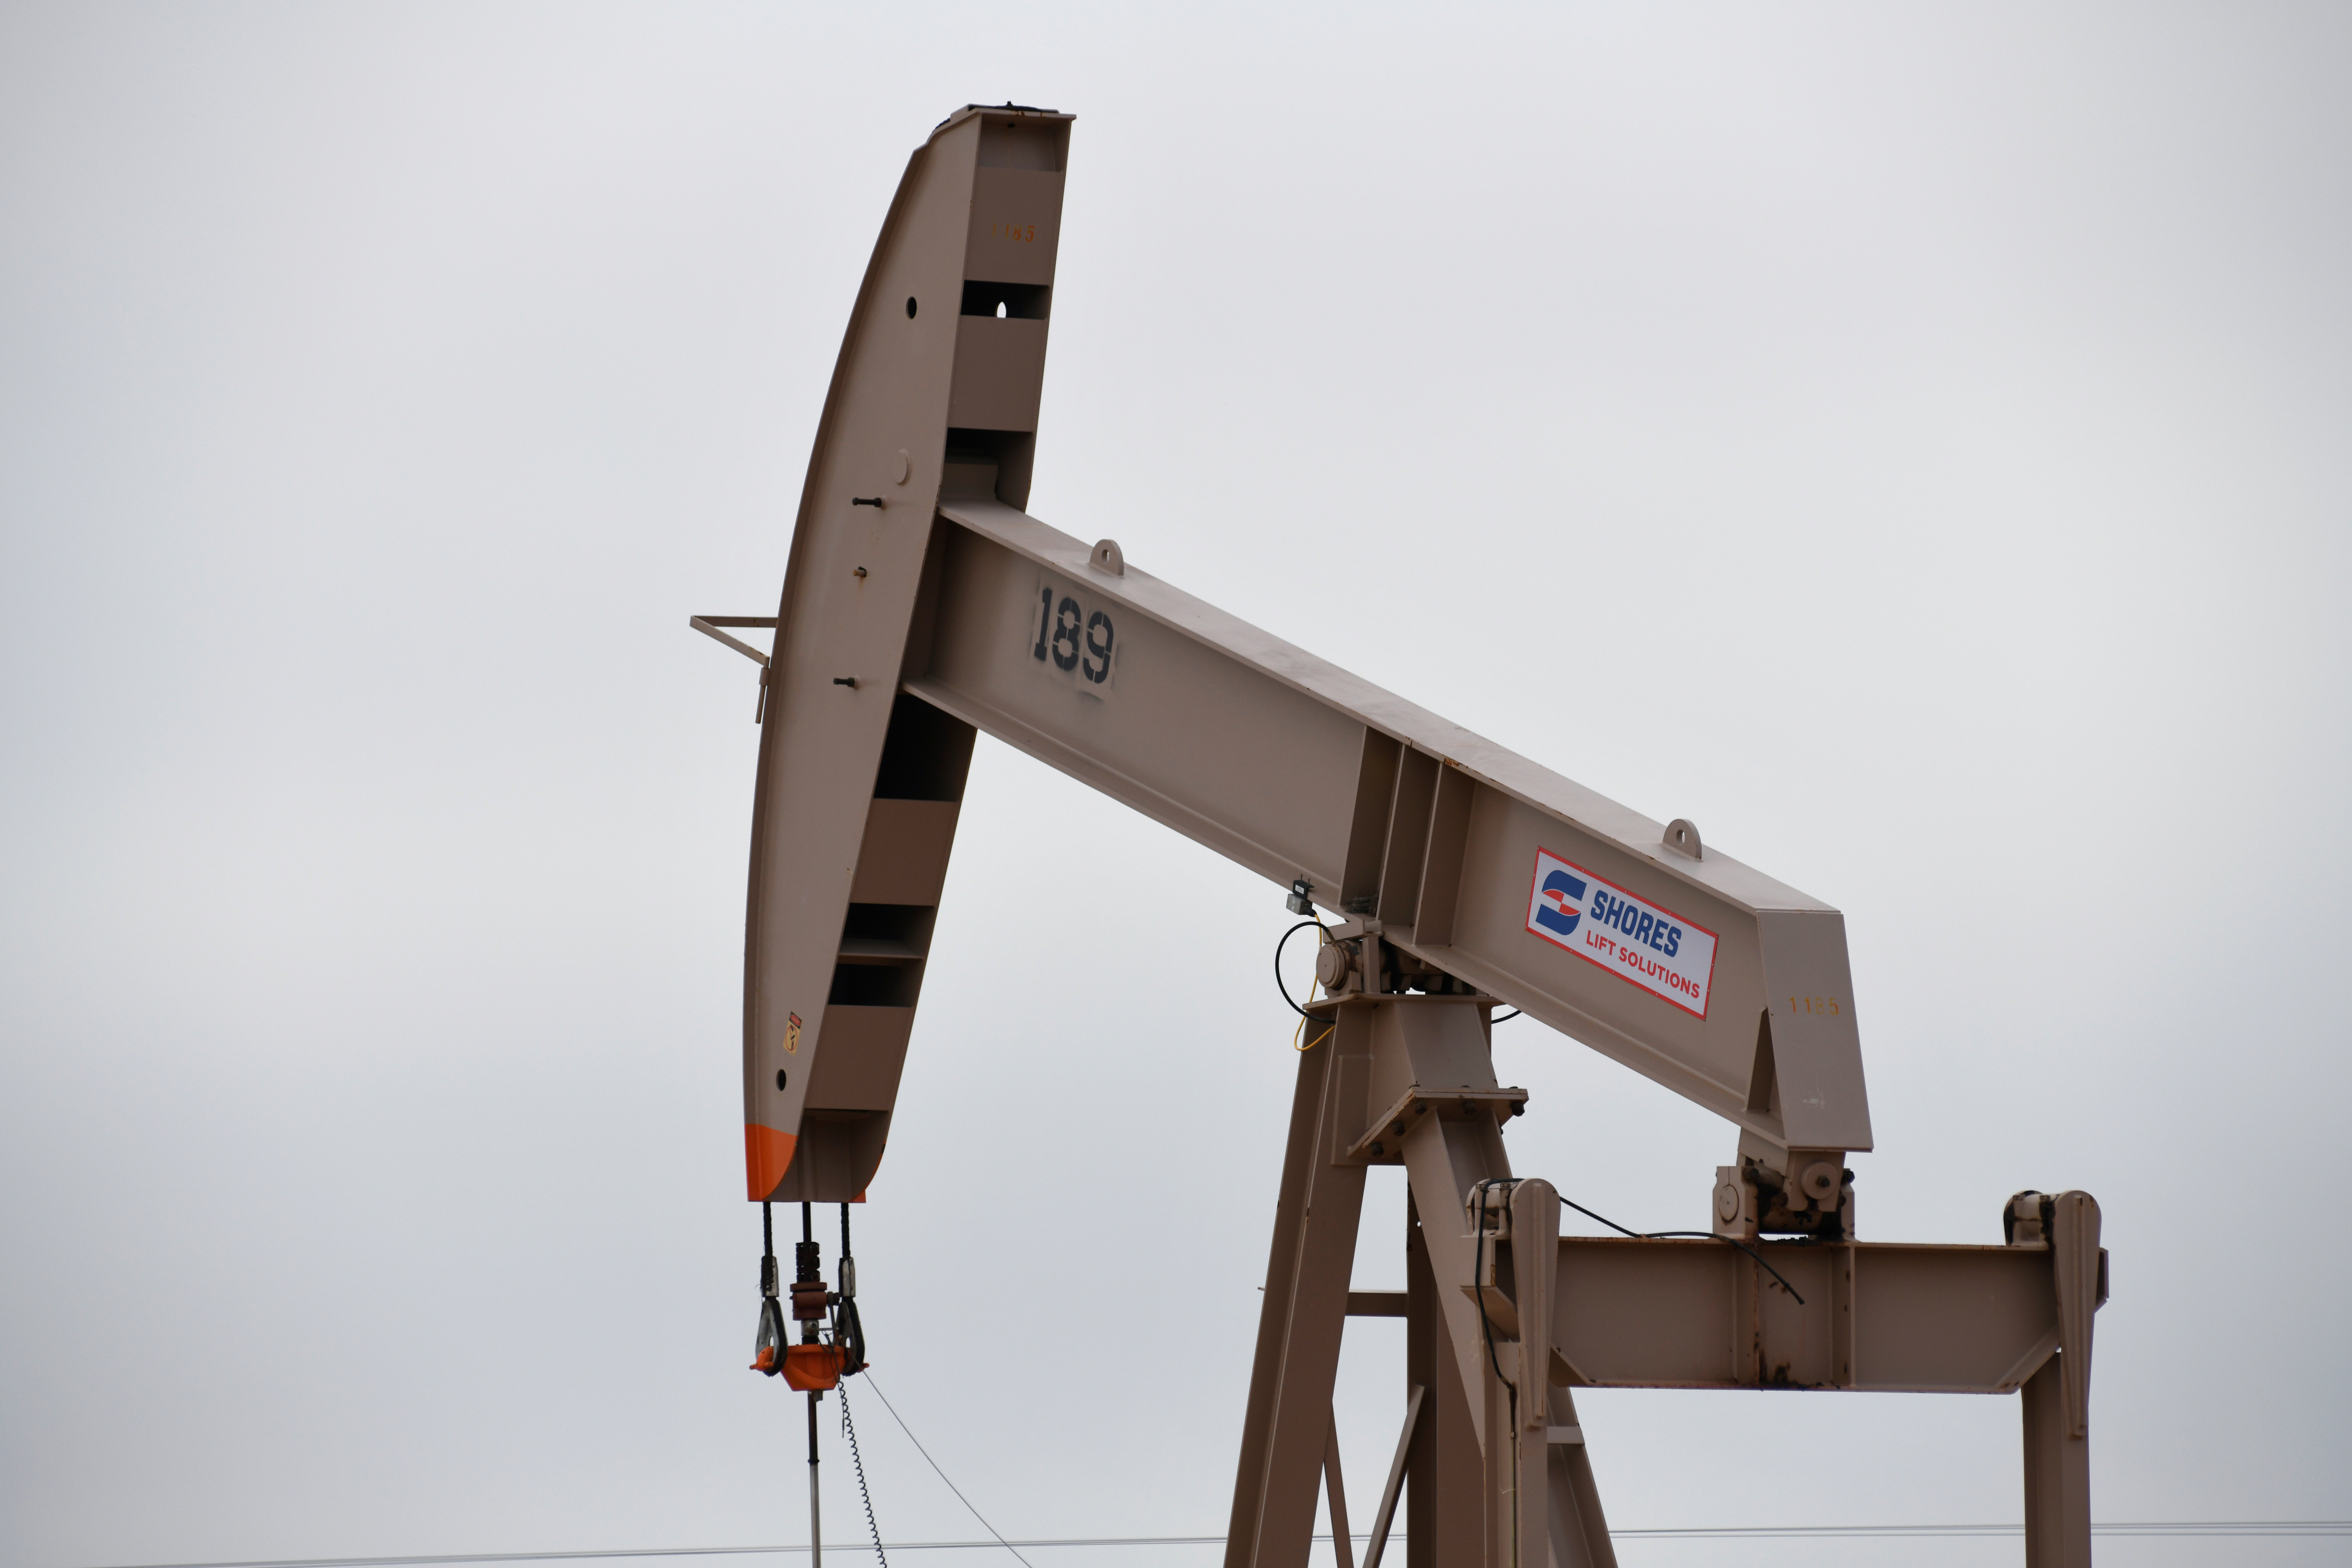 A pump jack operates in the Permian Basin oil and natural gas production area near Odessa